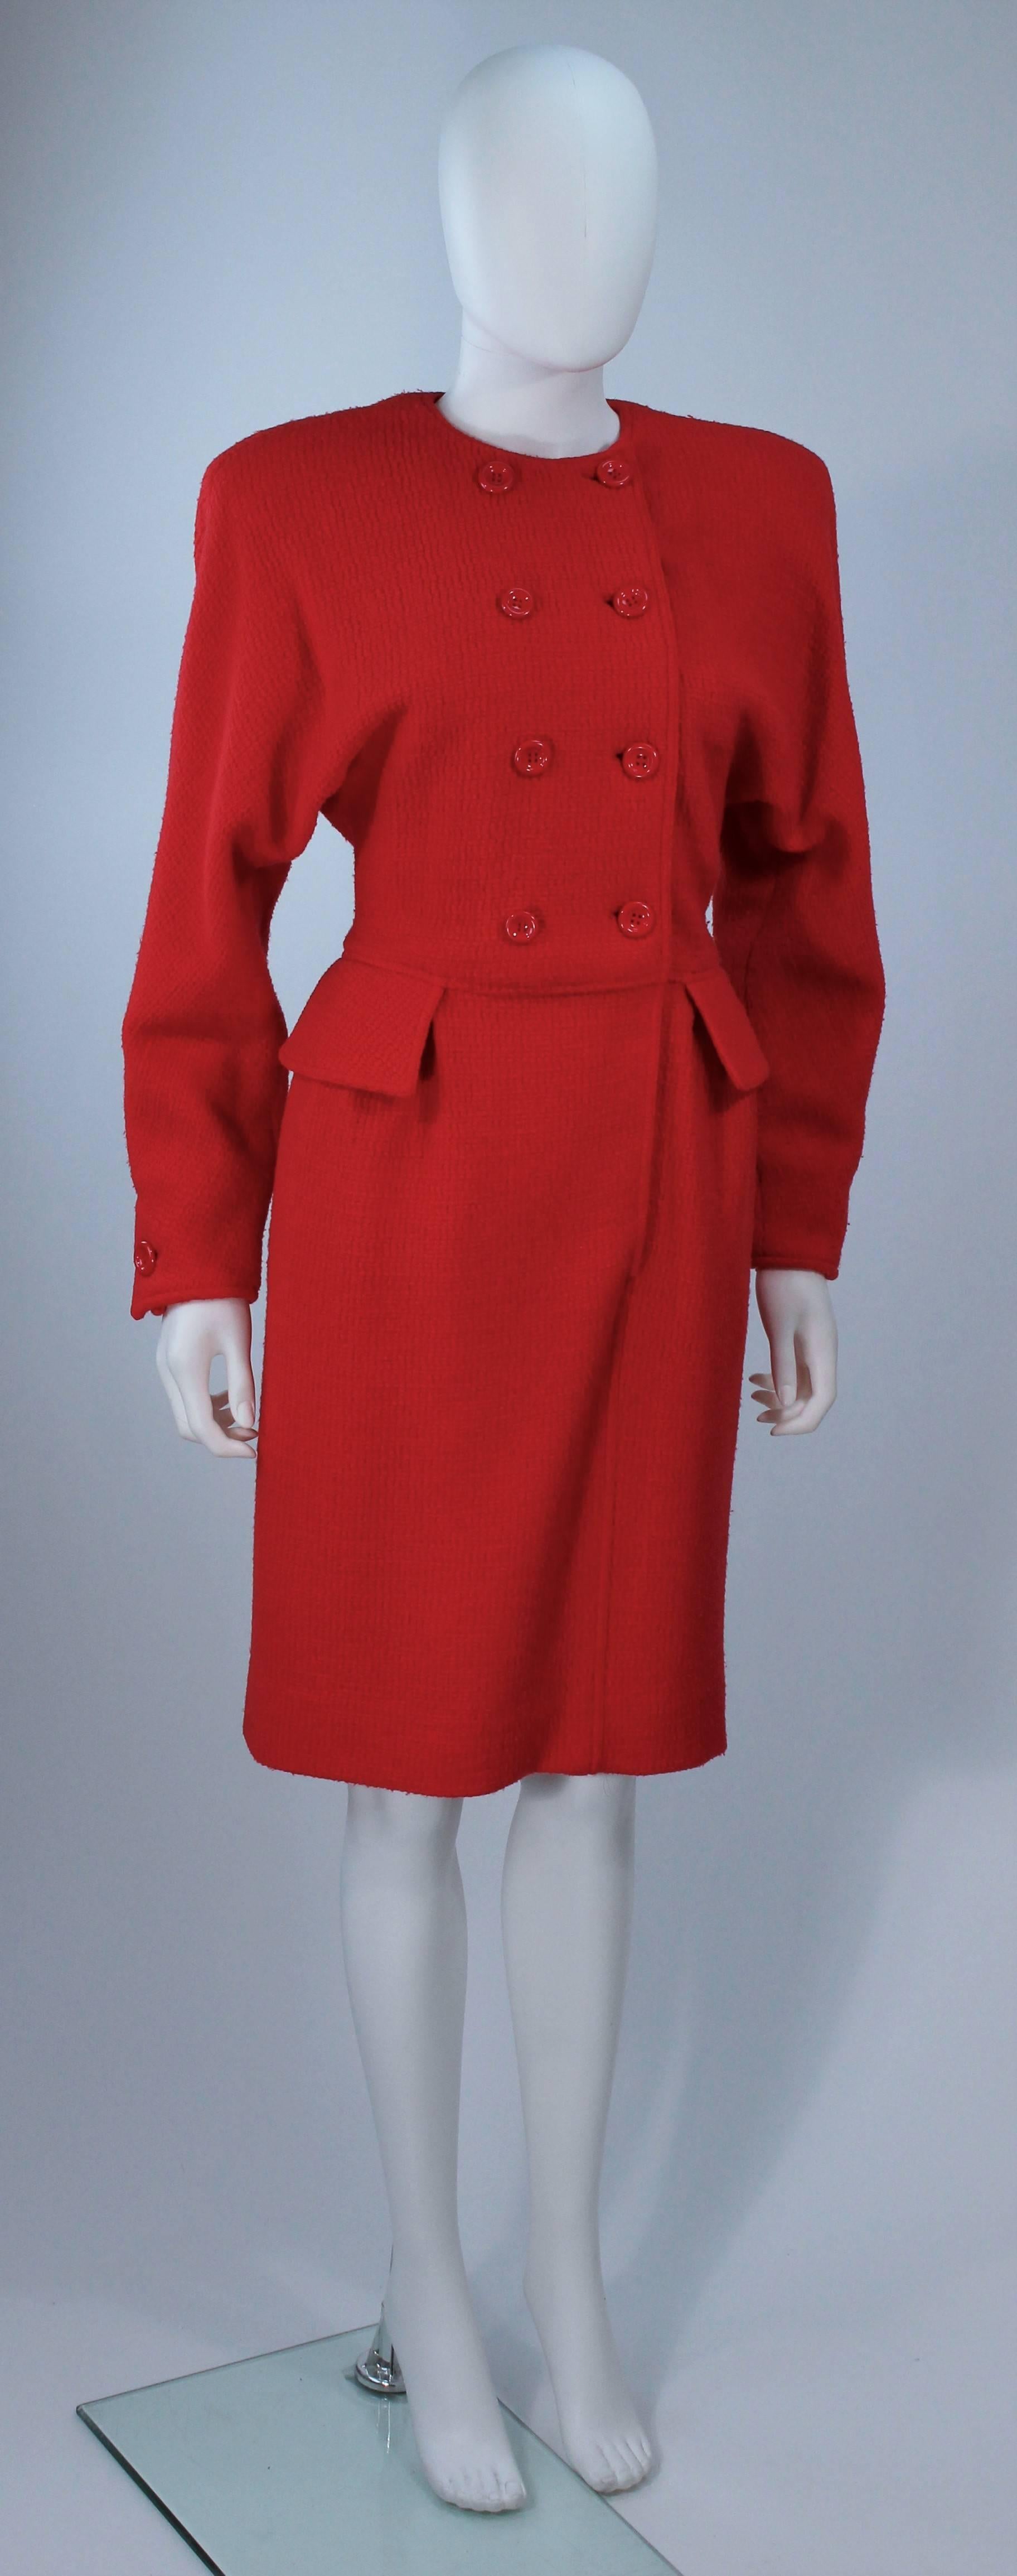  This Valentino  dress is composed of a red wool. Features center front buttons and side pockets. In excellent vintage condition. 

**Please cross-reference measurements for personal accuracy. Size in description box is an estimation.

Measures